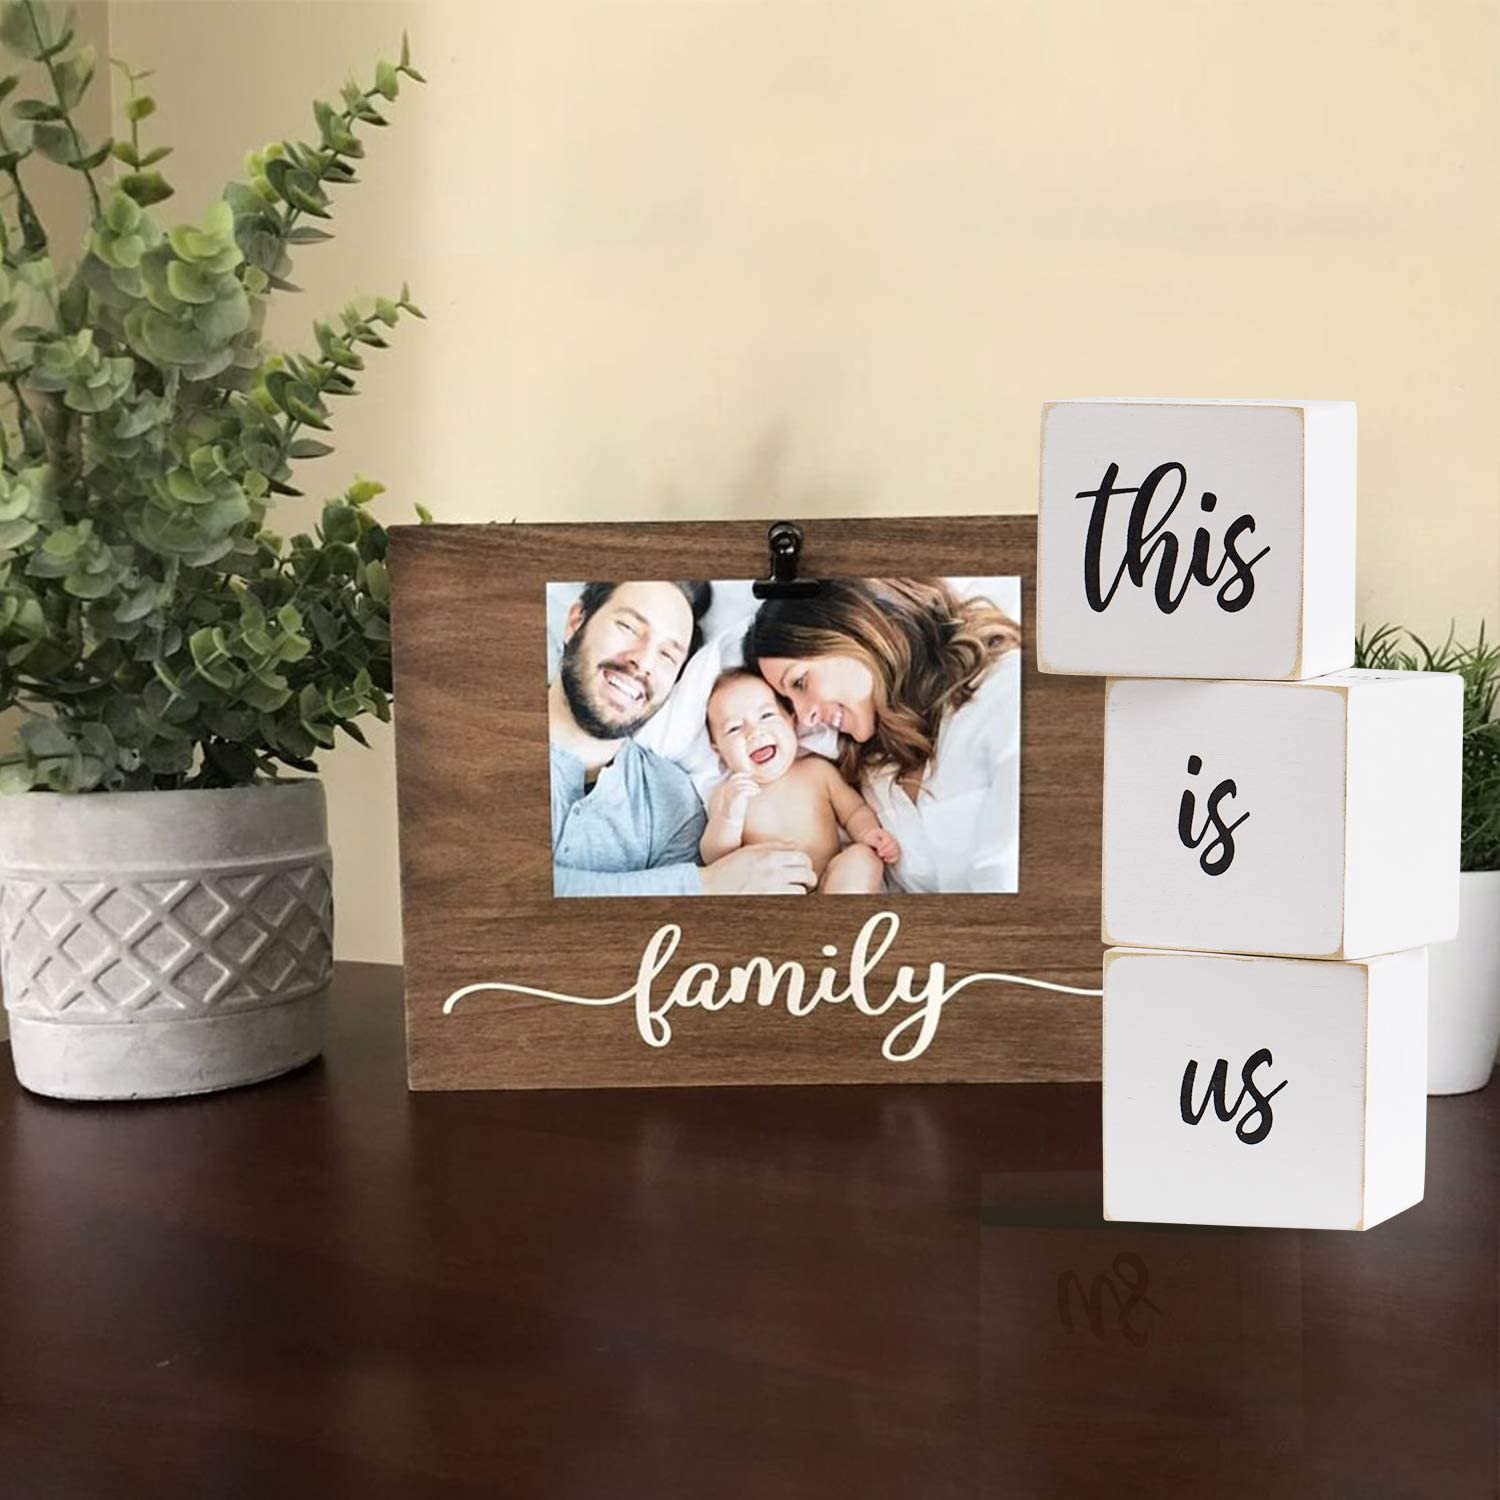 Wooden Farmhouse Table Top Decor-This is us&Our Life Our Story Our Home Letter Blocks Decor